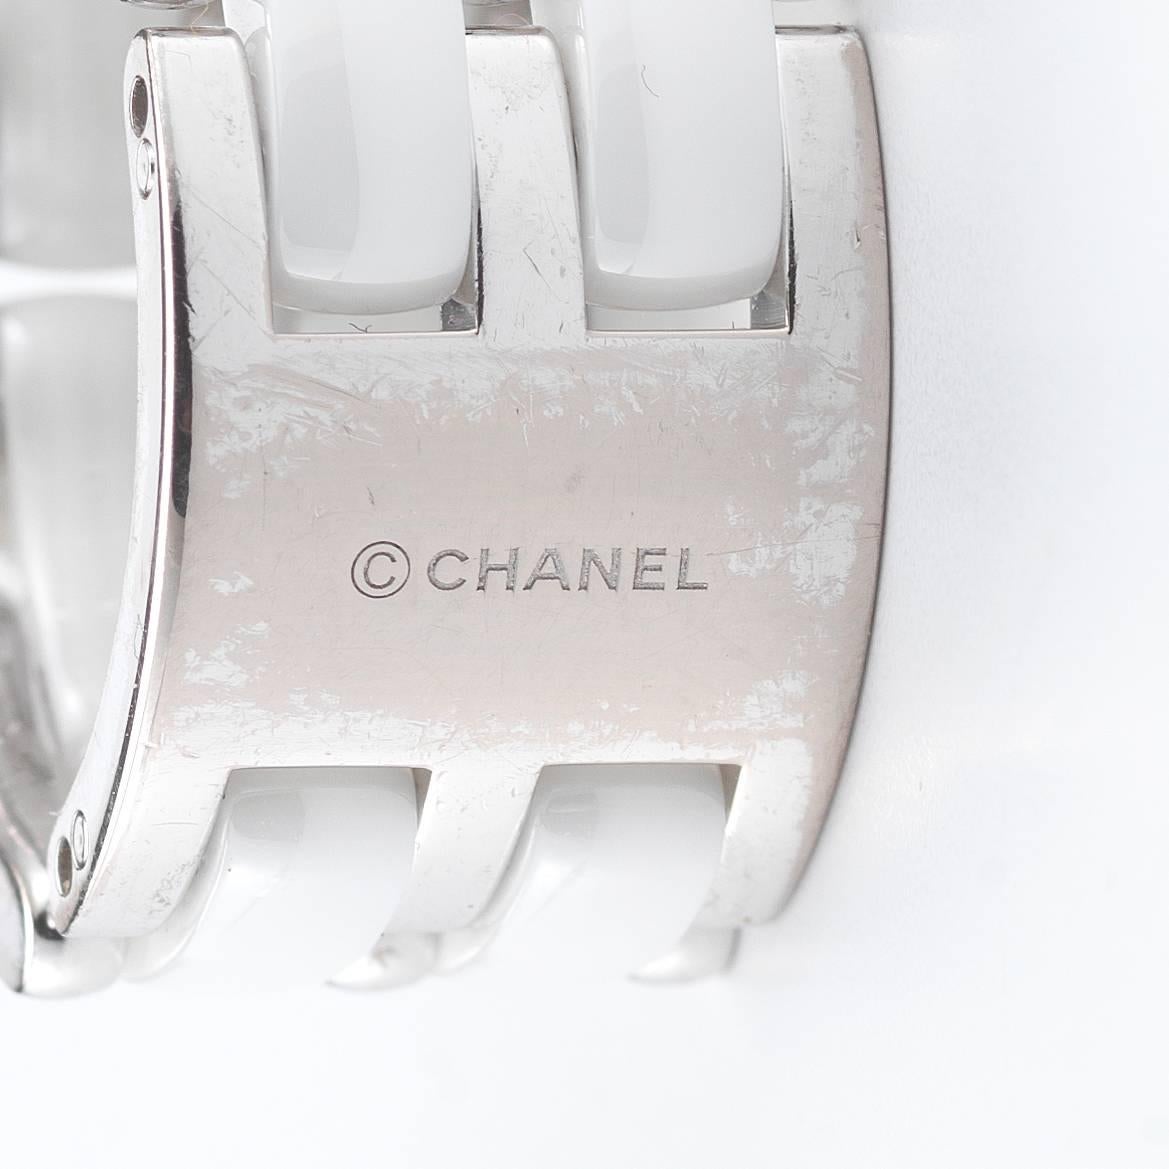 Gorgeous Chanel Ultra Ring with three rows of diamonds and two rows of white ceramic. Size 5.75, stamped serial # 00867. 